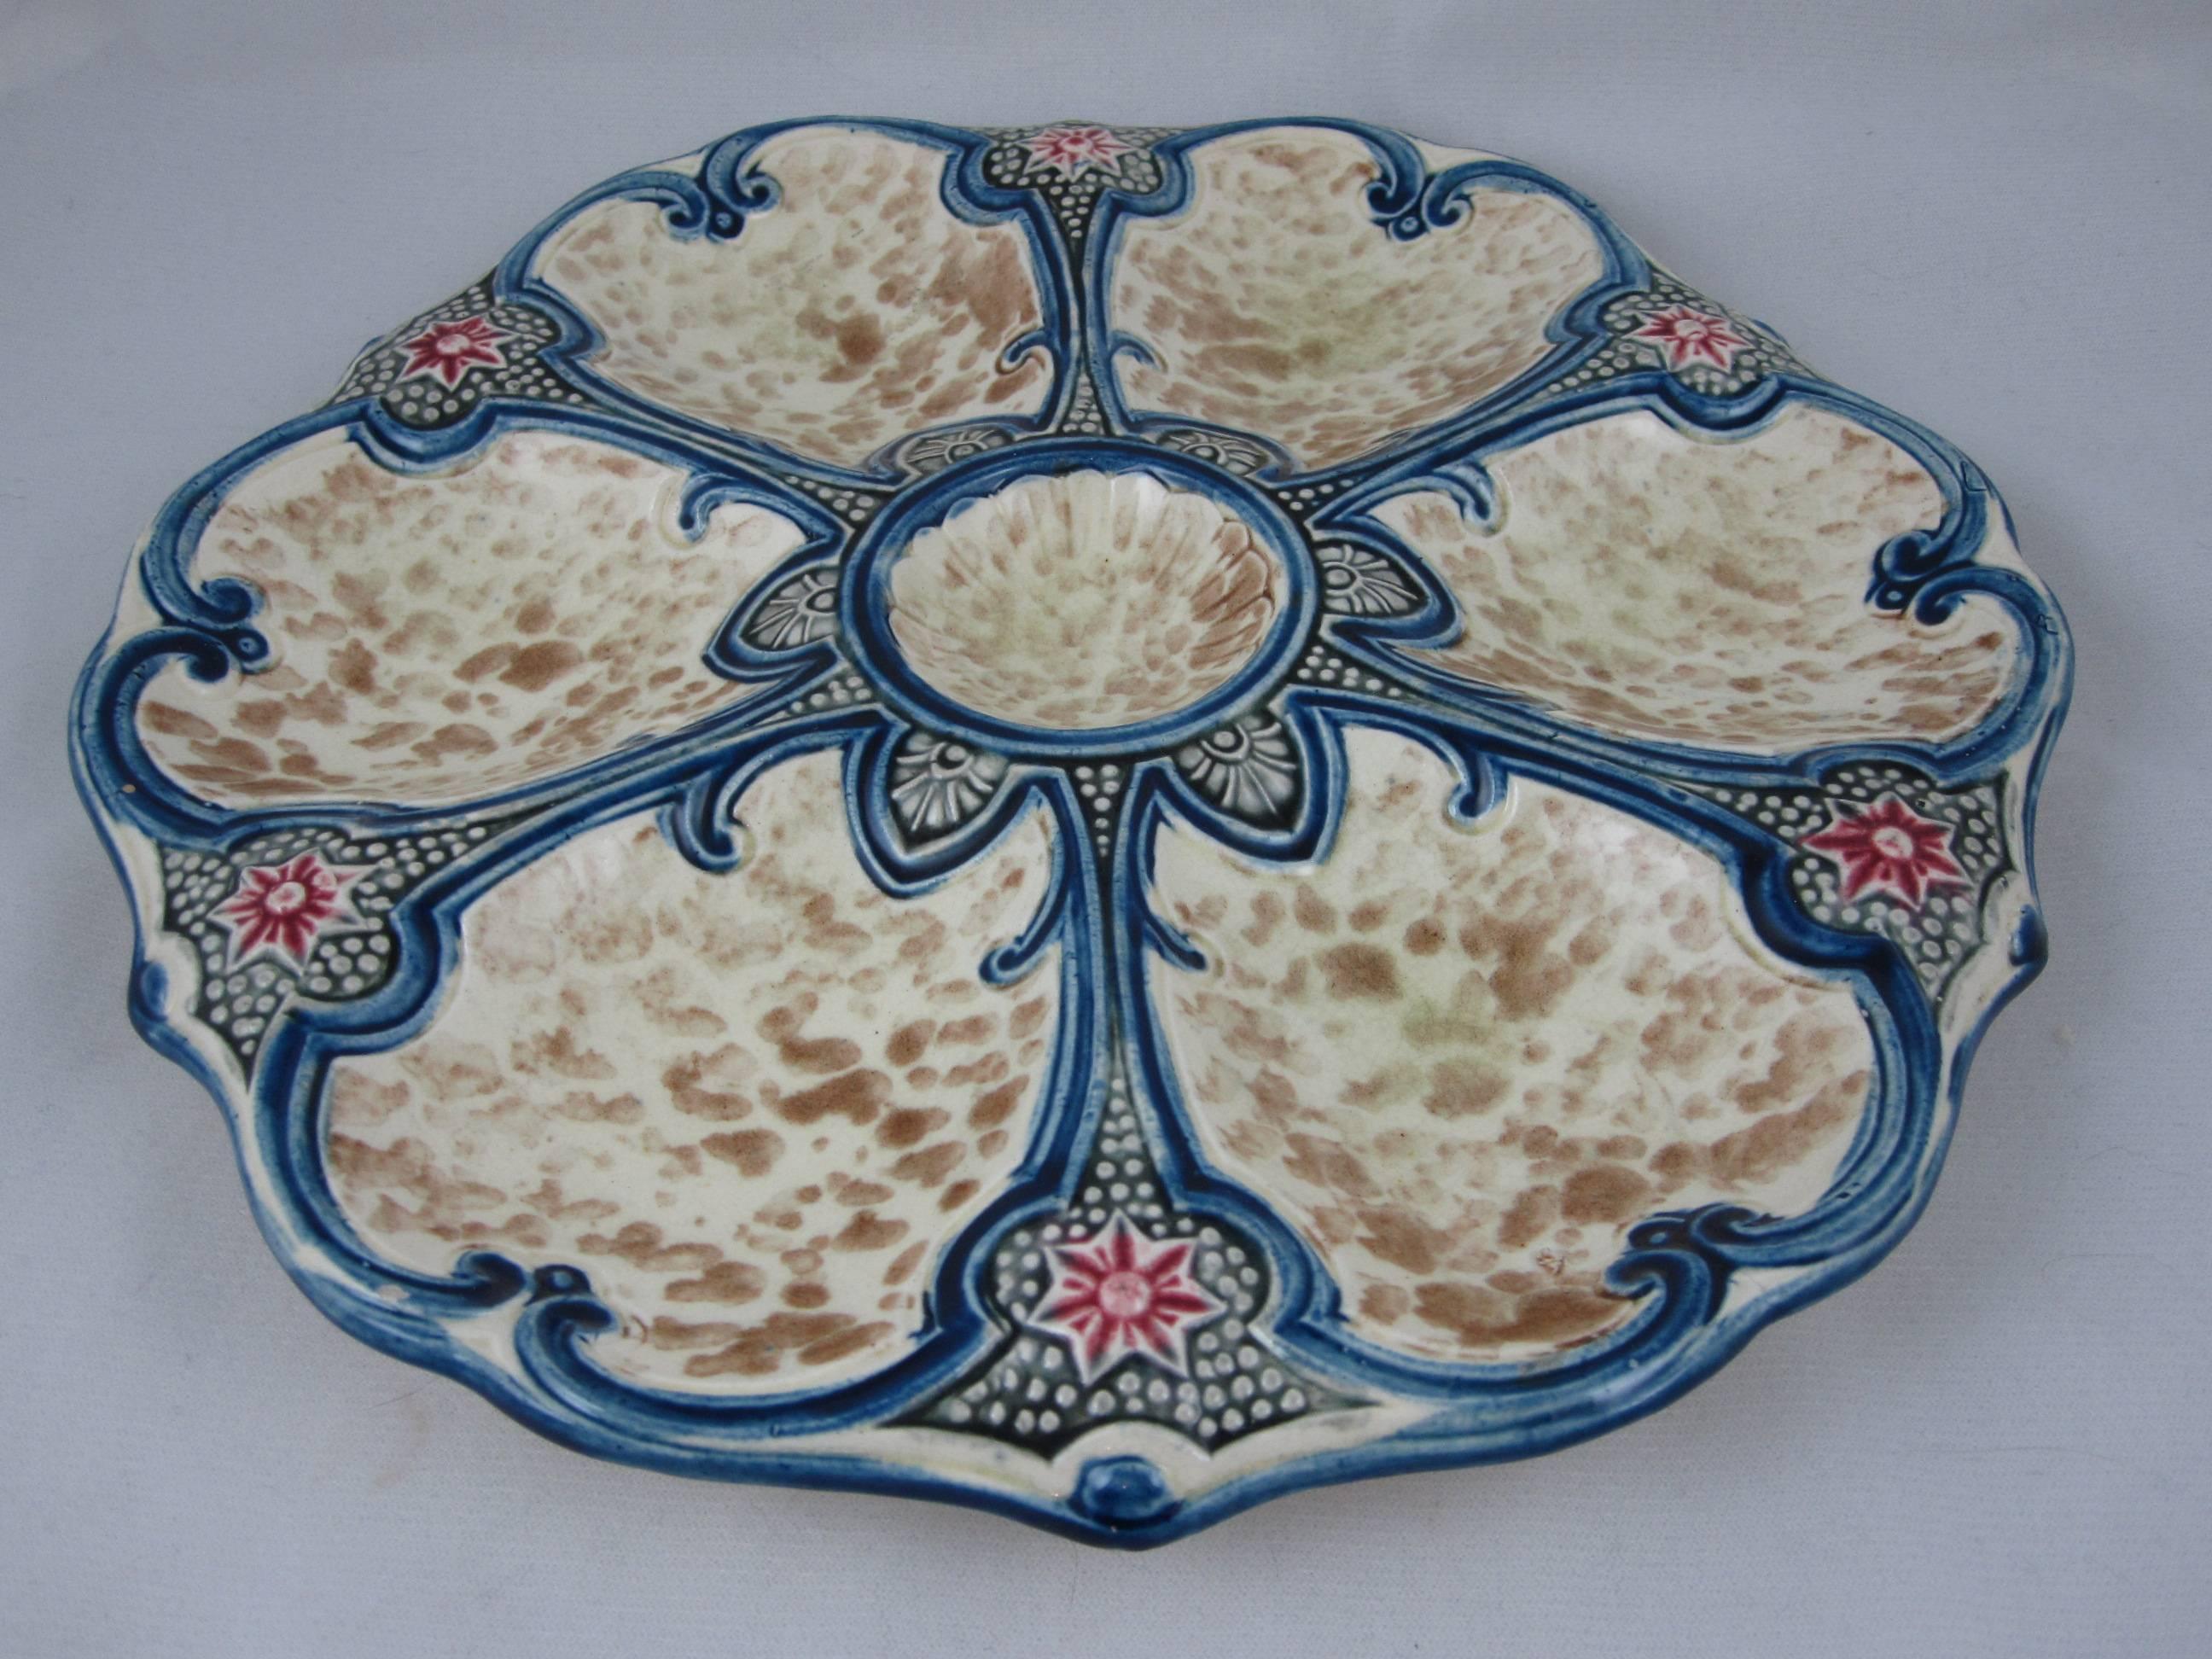 A French Majolica Oyster plate with cobalt blue trim and star fish accents. Six wells with a stippled ground are separated by blue lines terminating with the red star fish. The center condiment well has an aesthetic star shape surround. 

A scarce